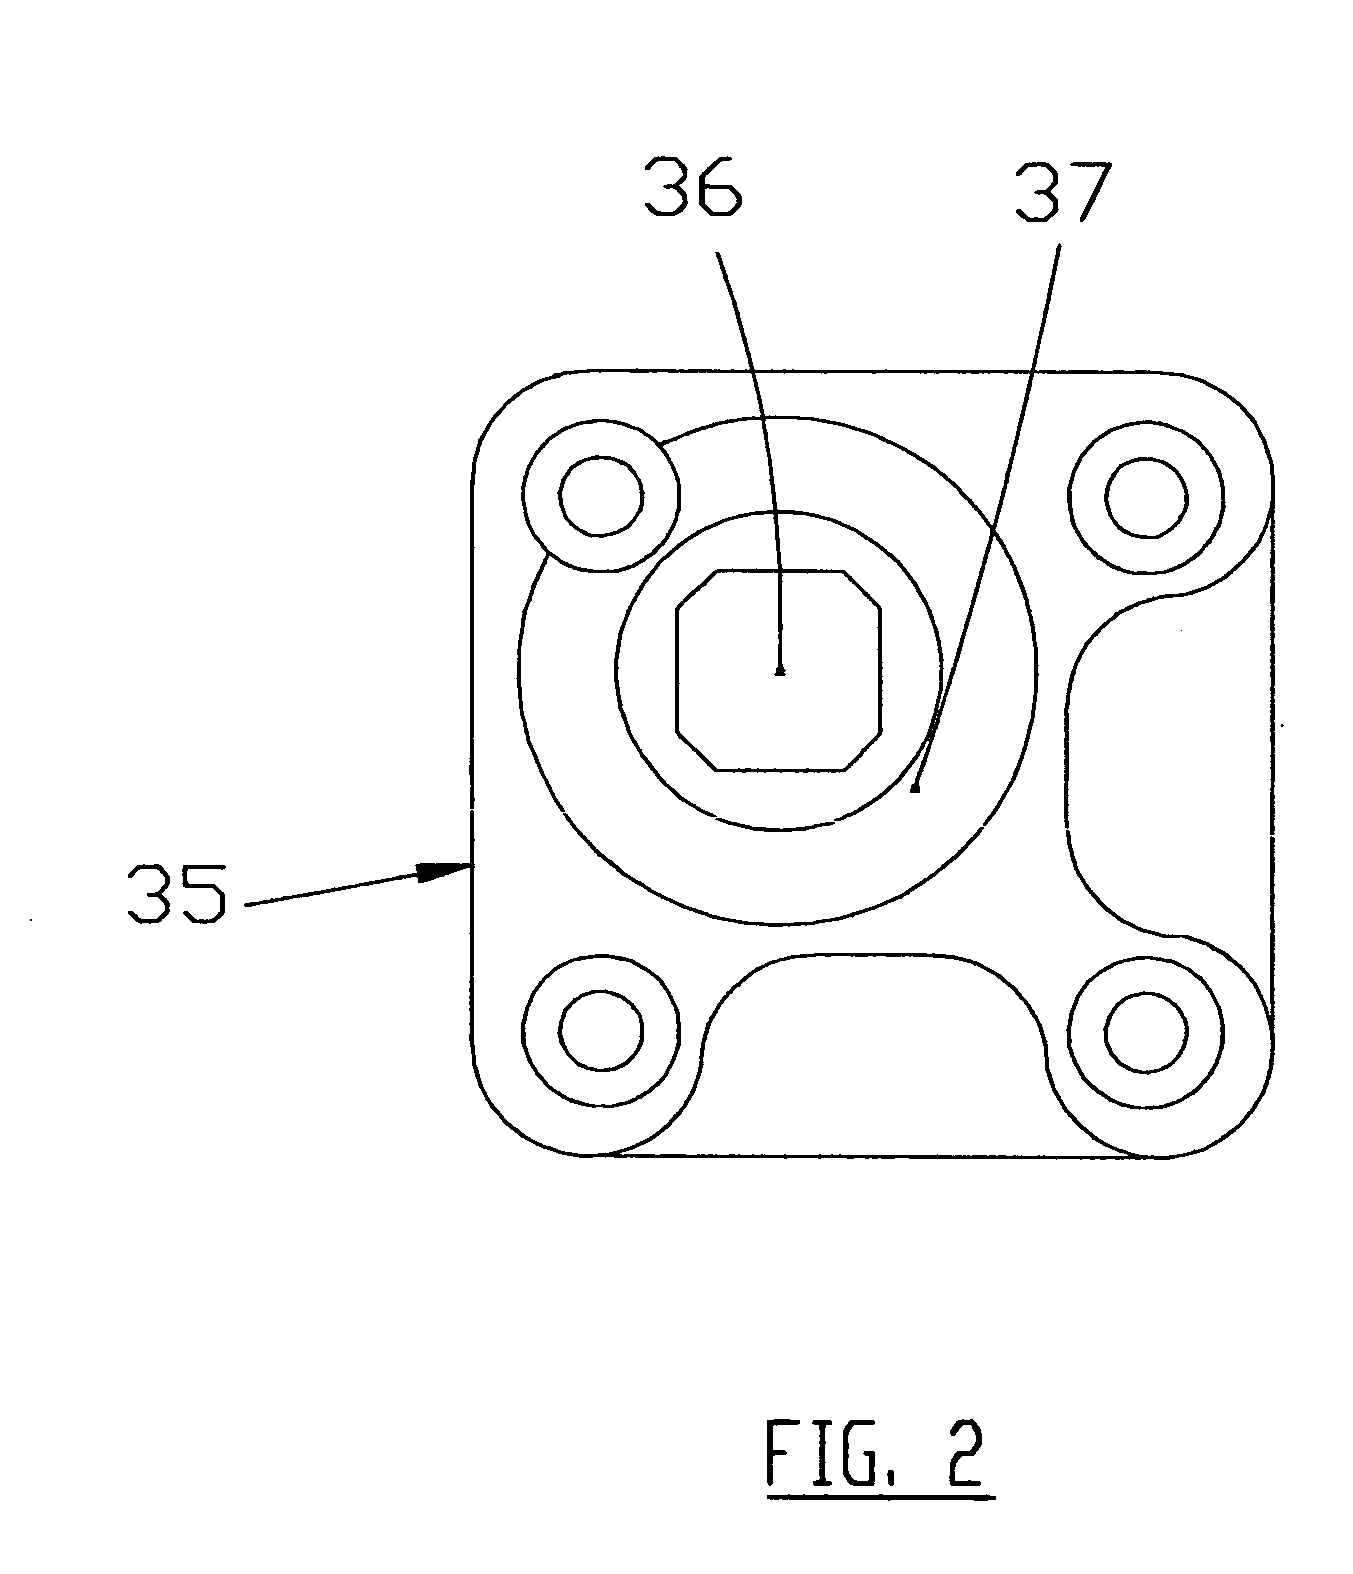 Four hole offset alignment device